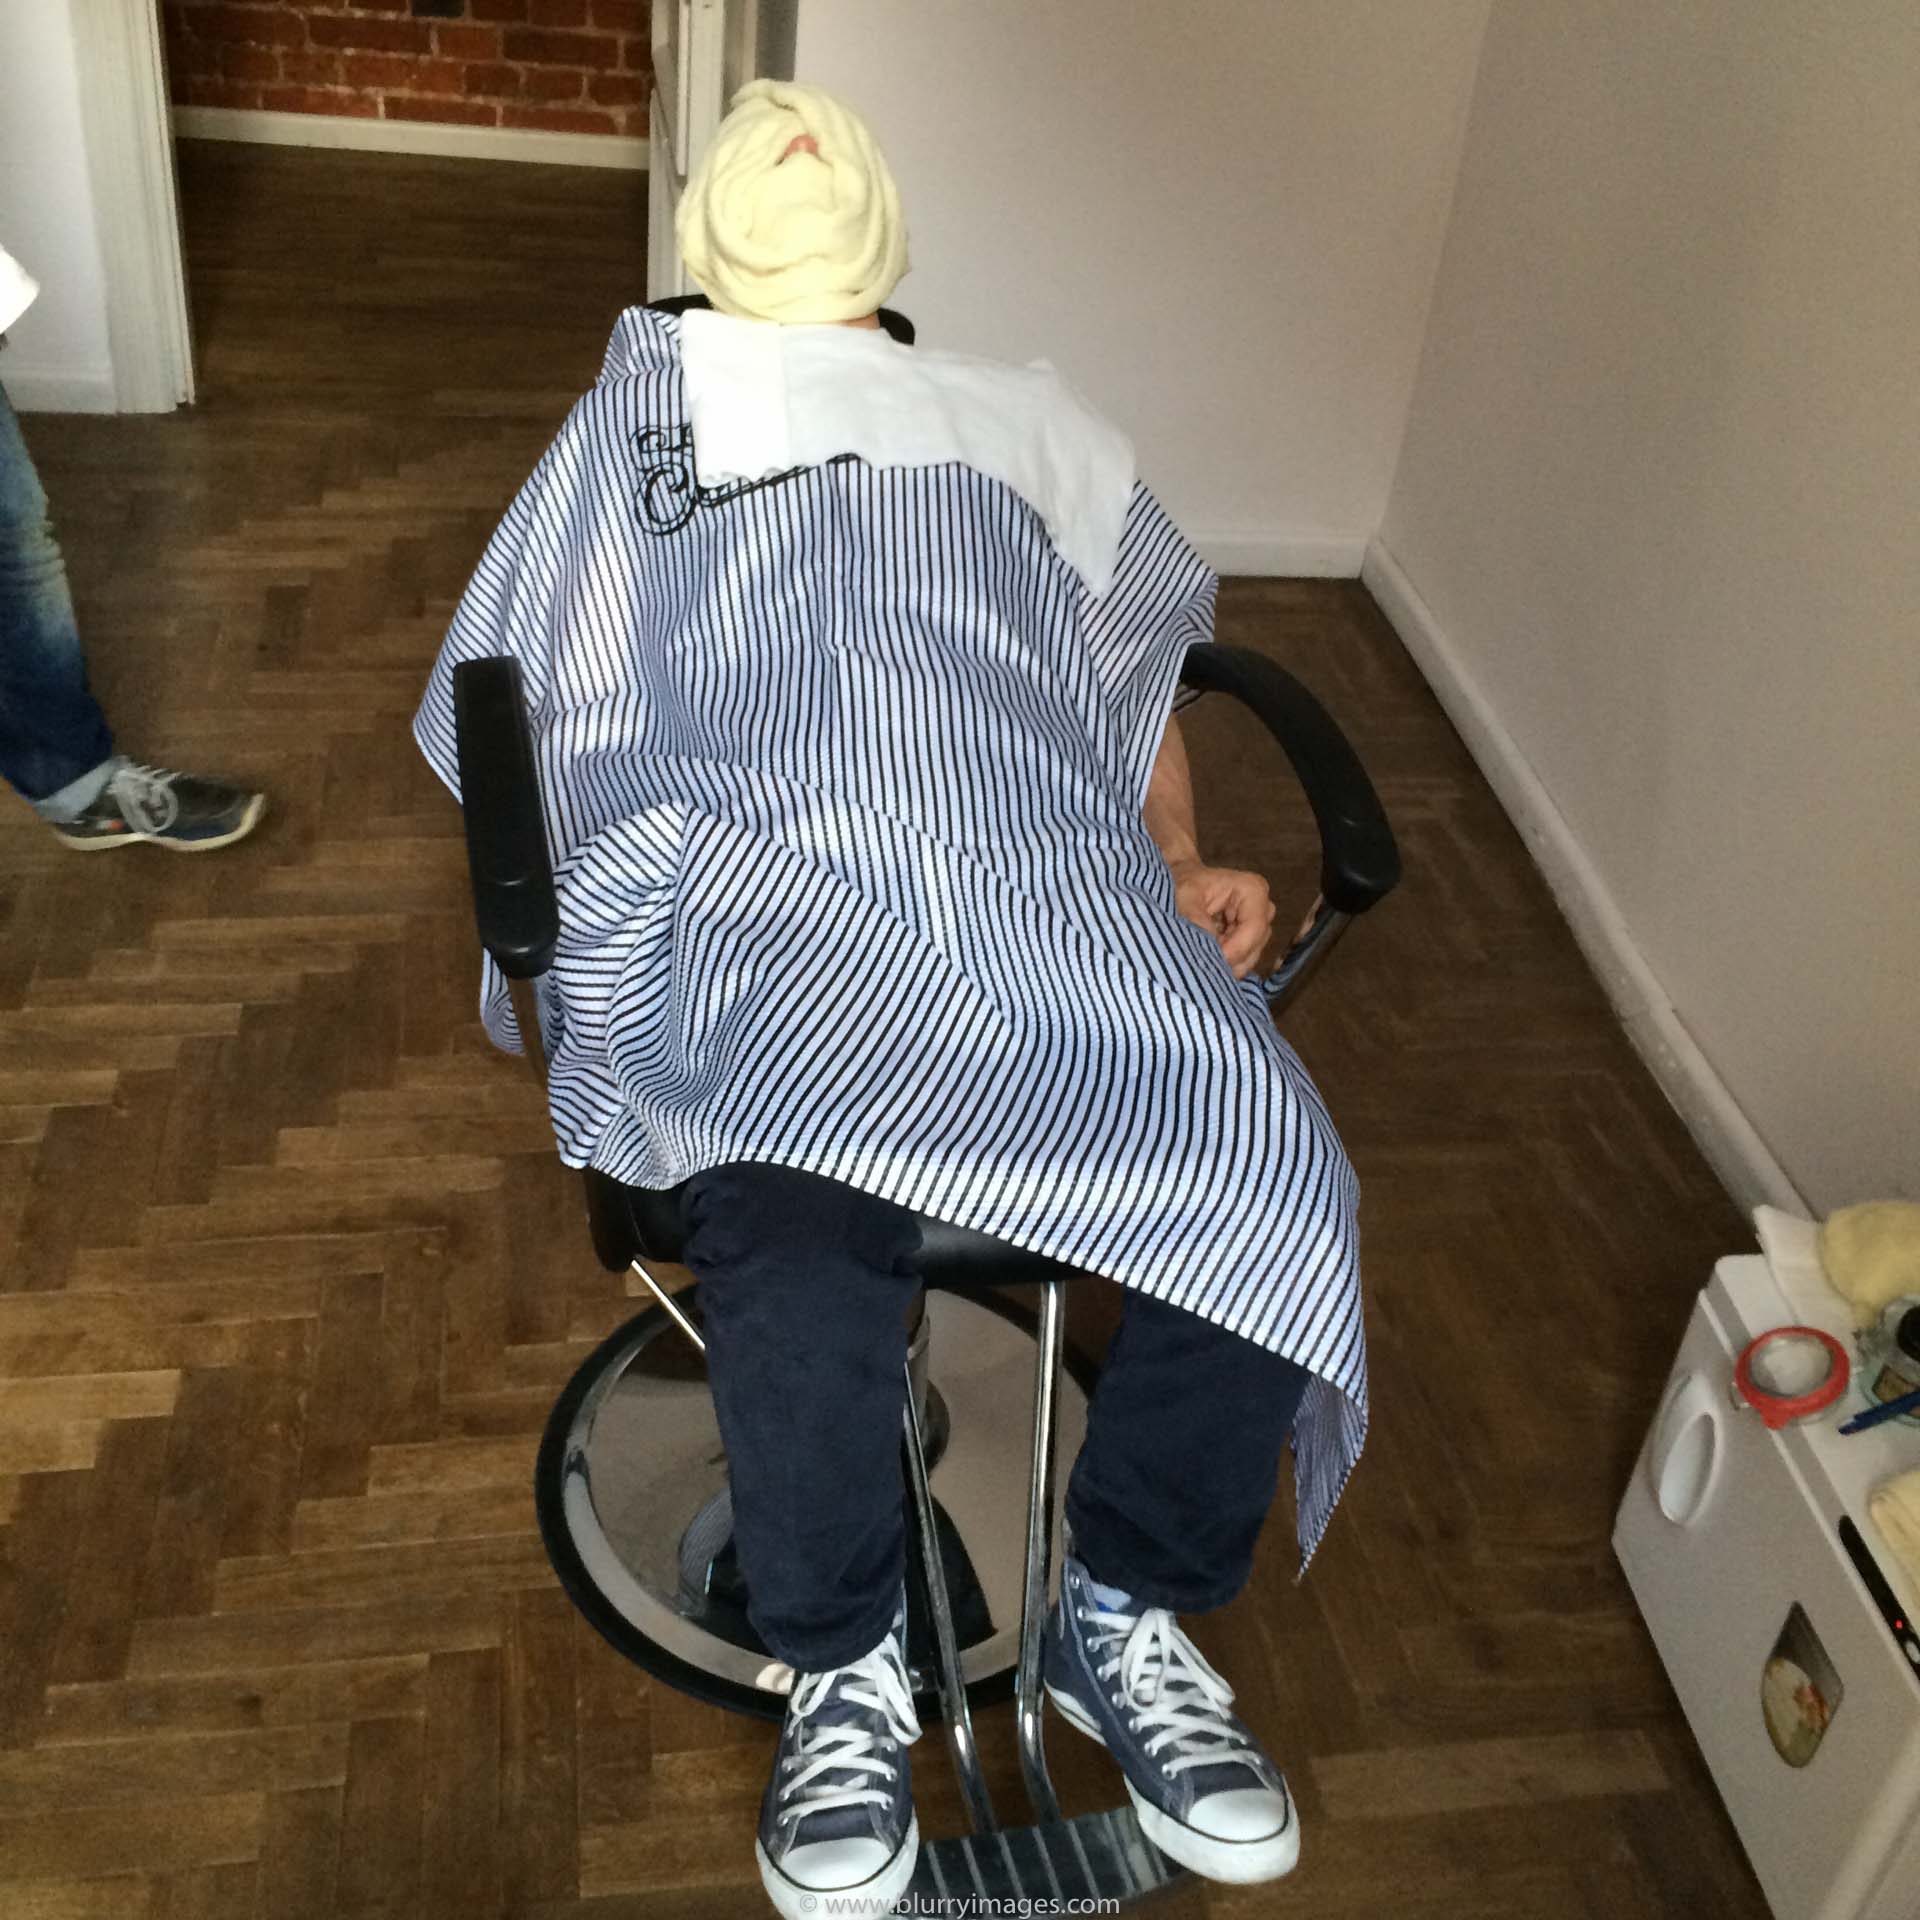 male barber, beard, trimmer, beard grooming, barber shop, adults only, Business Finance and Industry, hairdresser, wooden floor, armchair, yellow towel, white cupboard, white towel, man lies, blue jeans, blue shoes, white shoe-laces, indoors, 2015